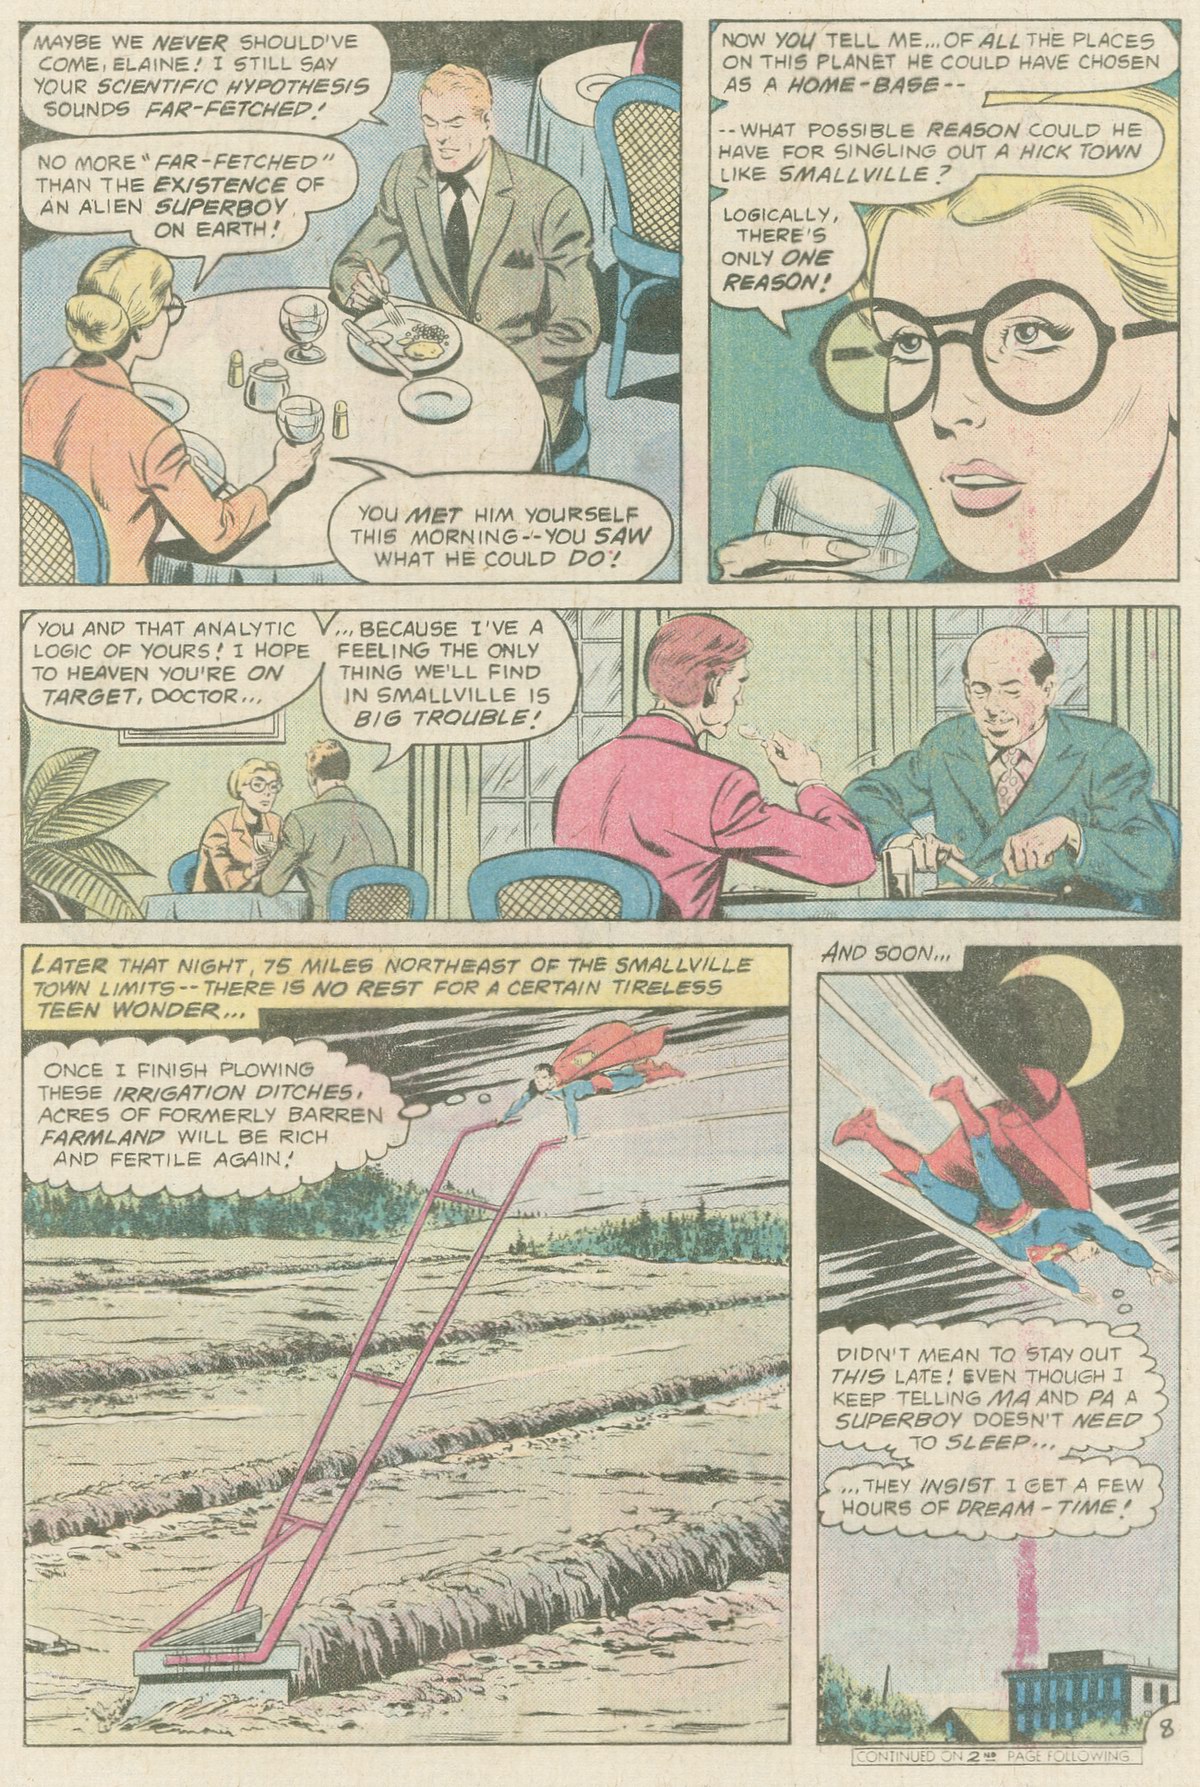 The New Adventures of Superboy 16 Page 8